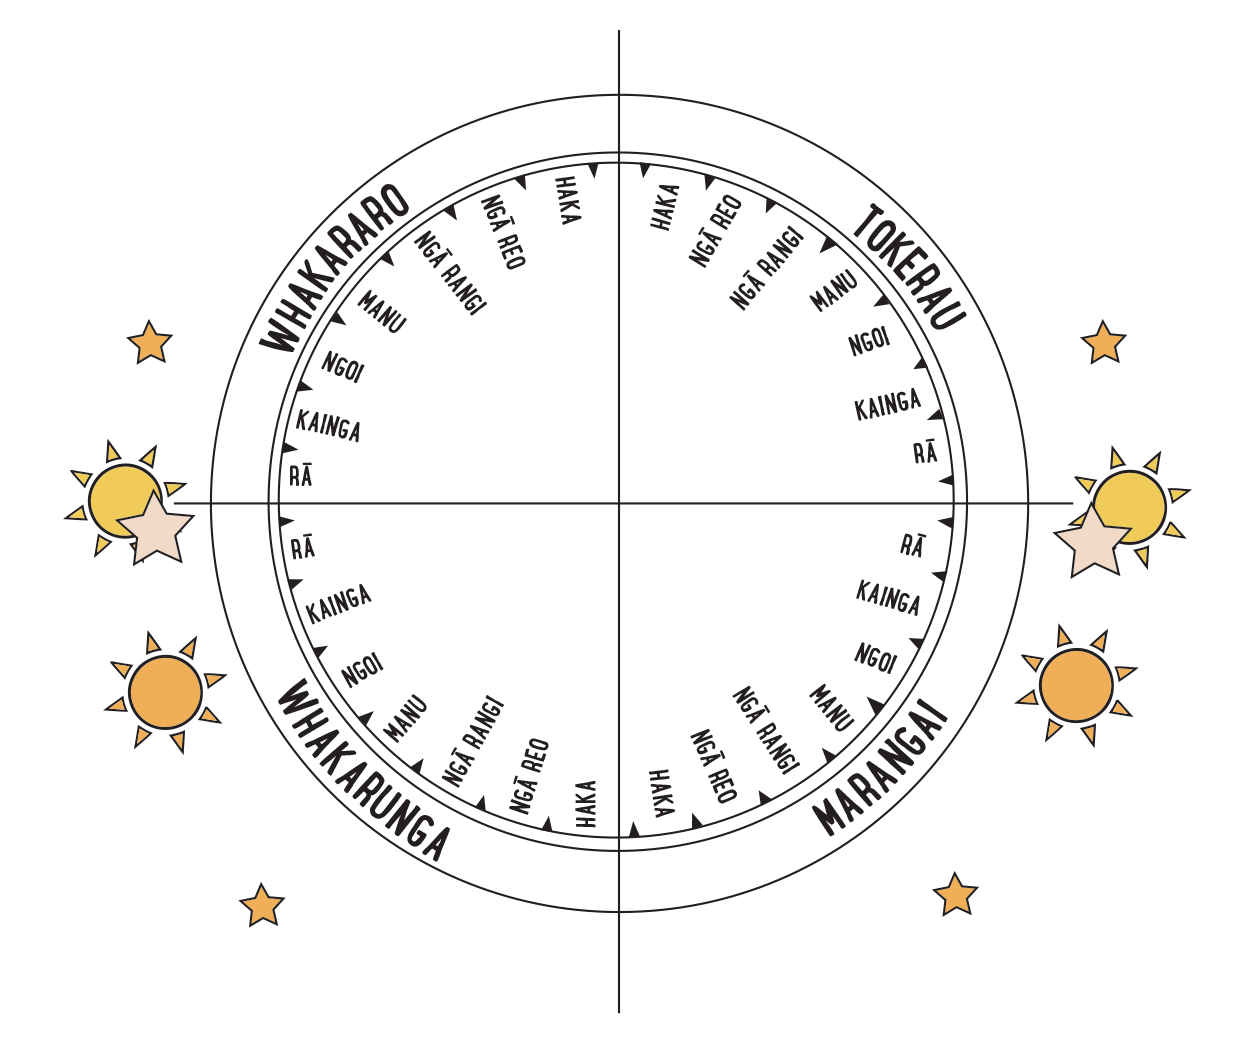 Star compass diagram showing a circle split into 4 quarters, one for each wind. The 7 whare are arranged around the dial of each wind quarter.